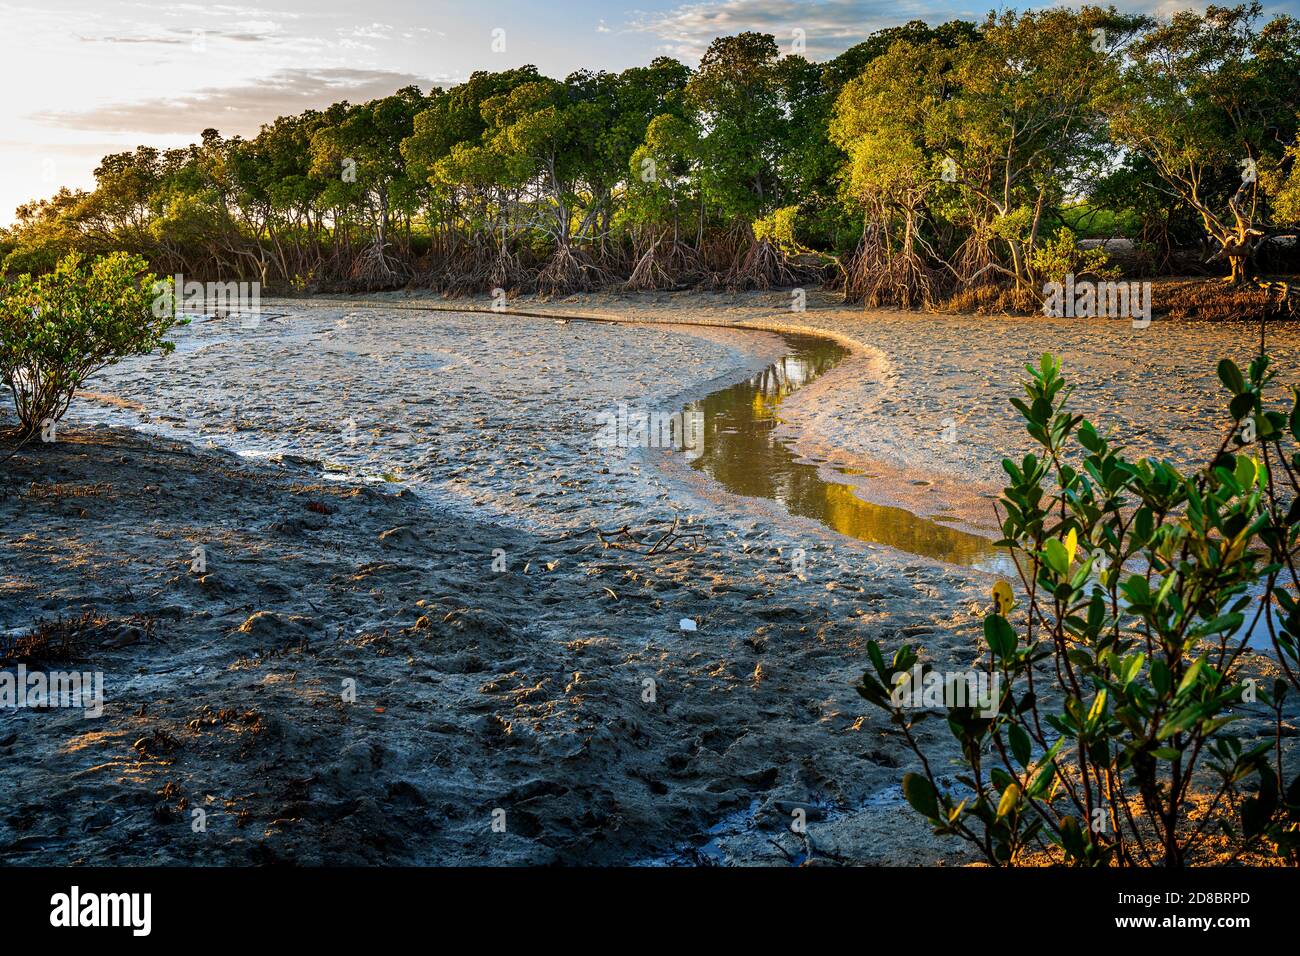 Tidal mangrove lined creek at low tide, Clairview, Central Queensland, Australia. Stock Photo